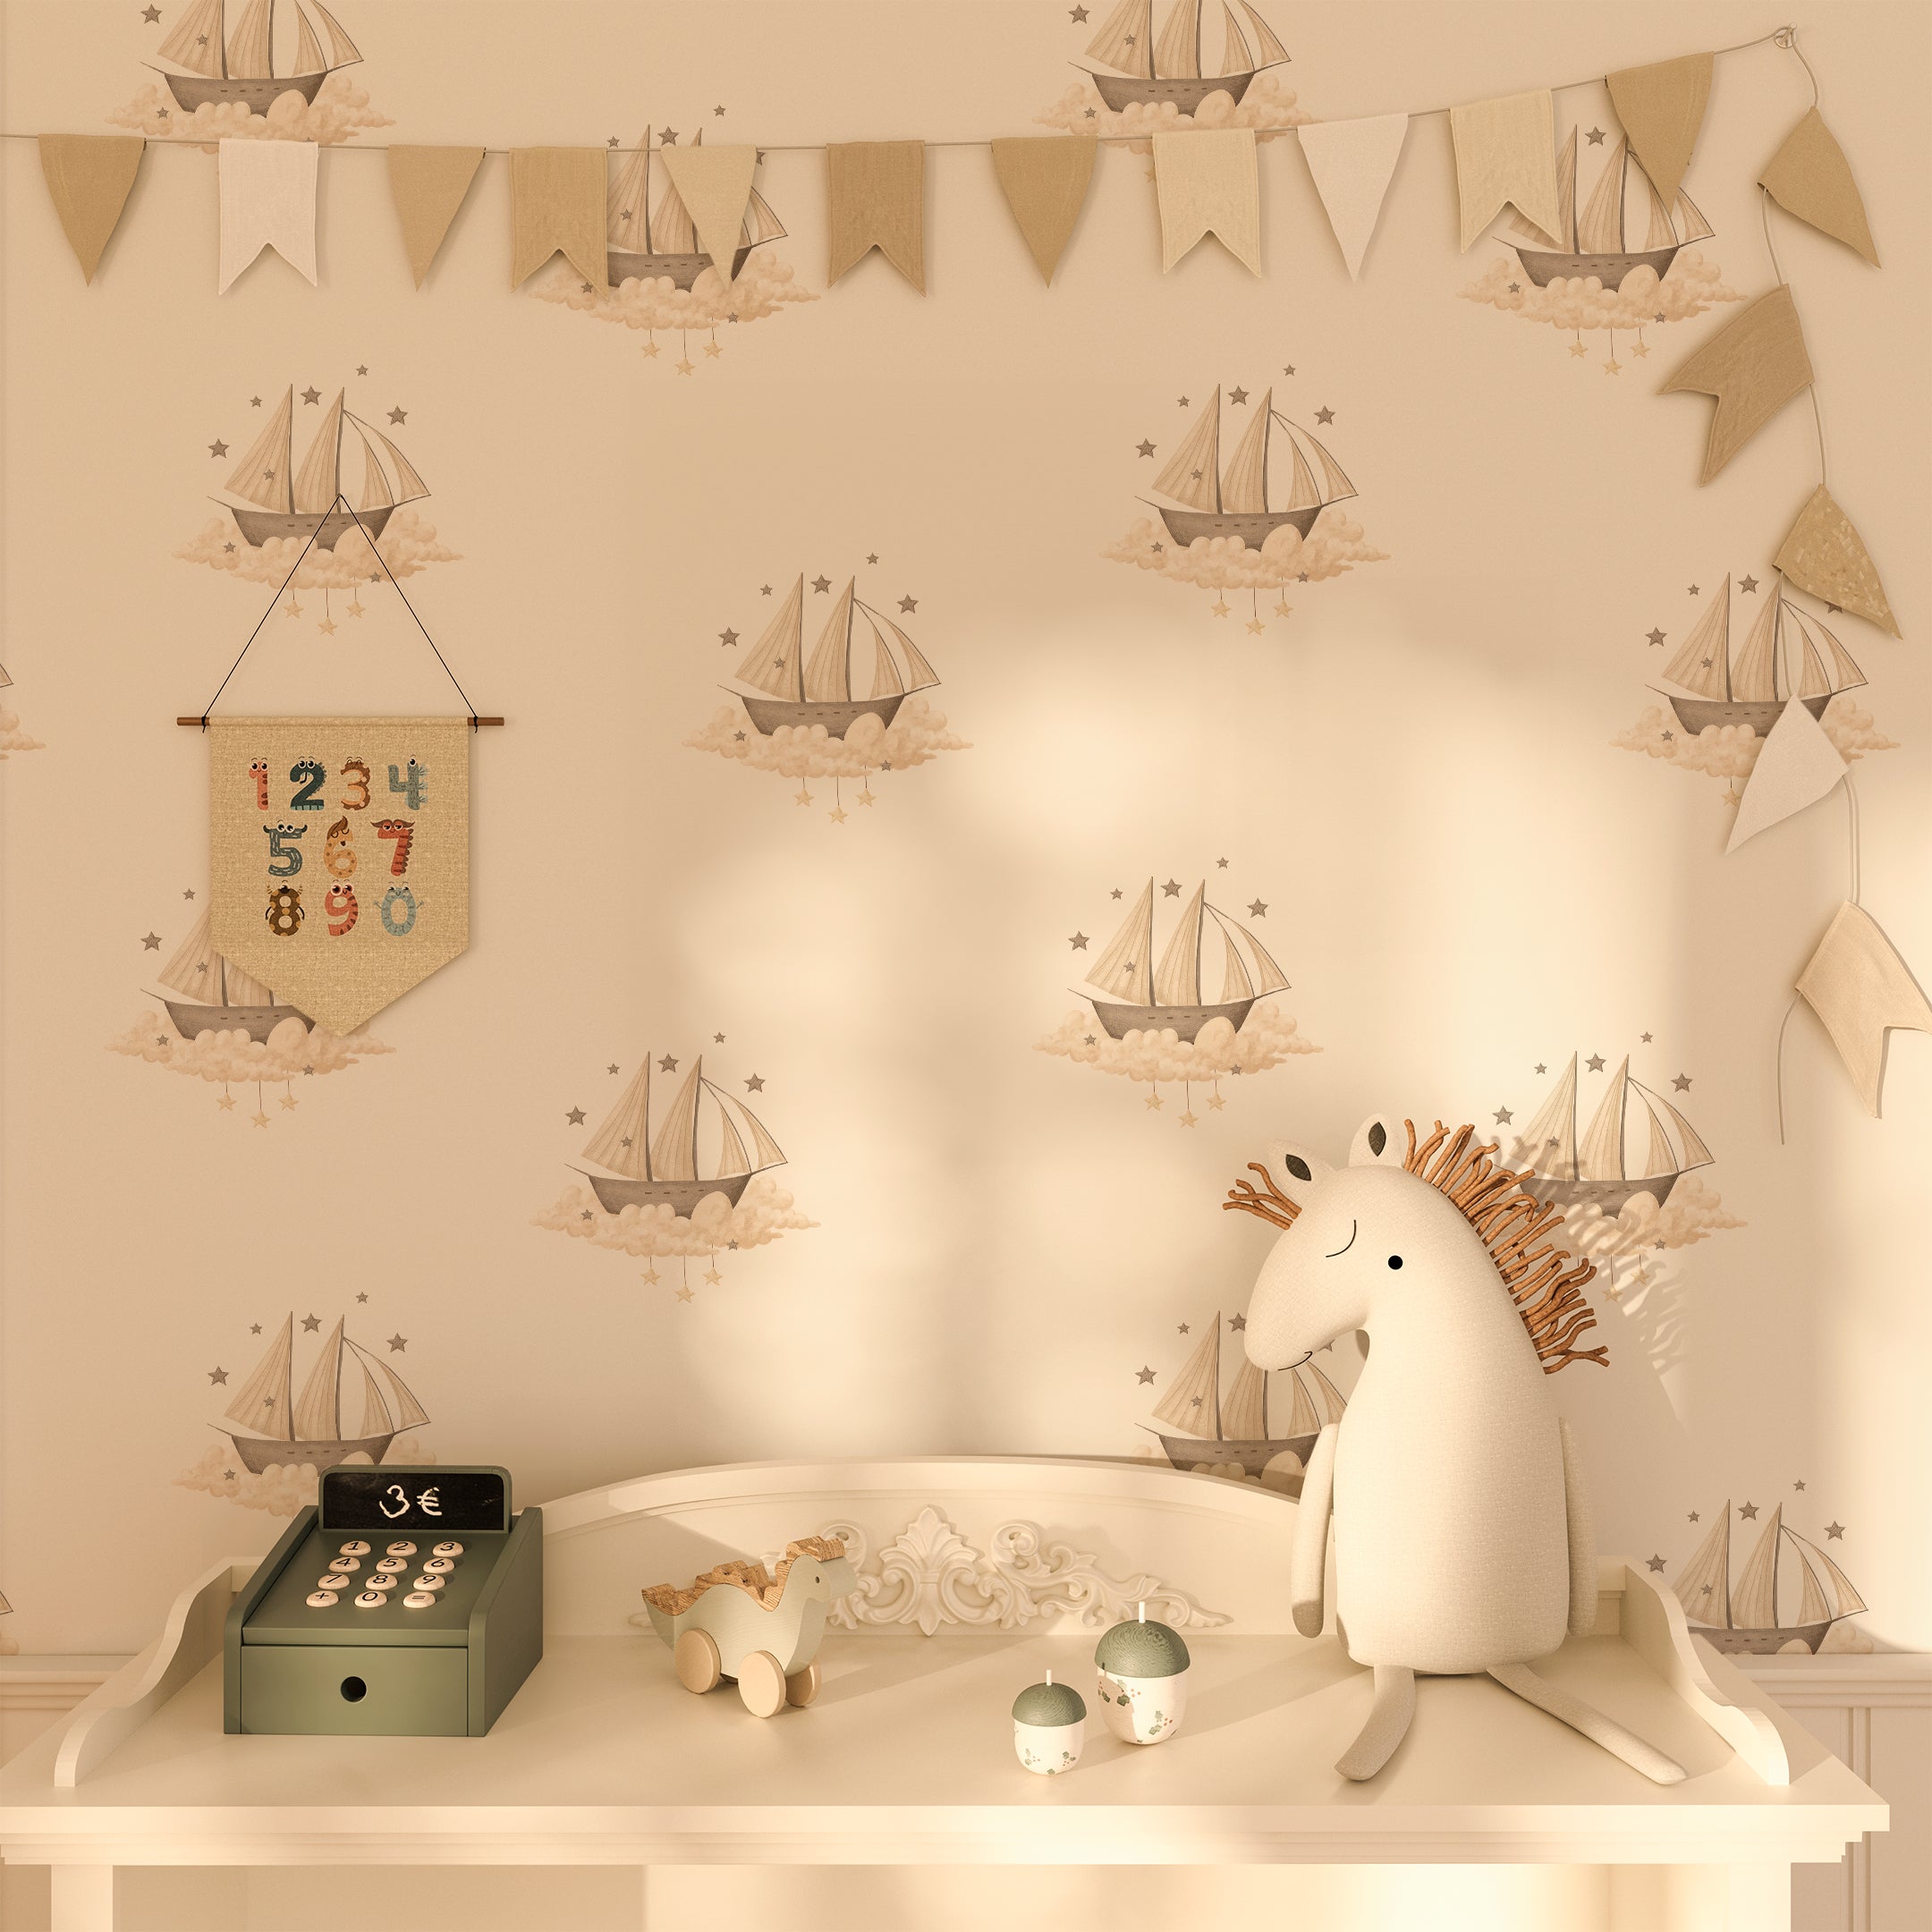 A playful room with Dreamy Sailboats Wallpaper, decorated with soft toys and nautical accents. The sailboat pattern enhances the room's dreamy atmosphere.